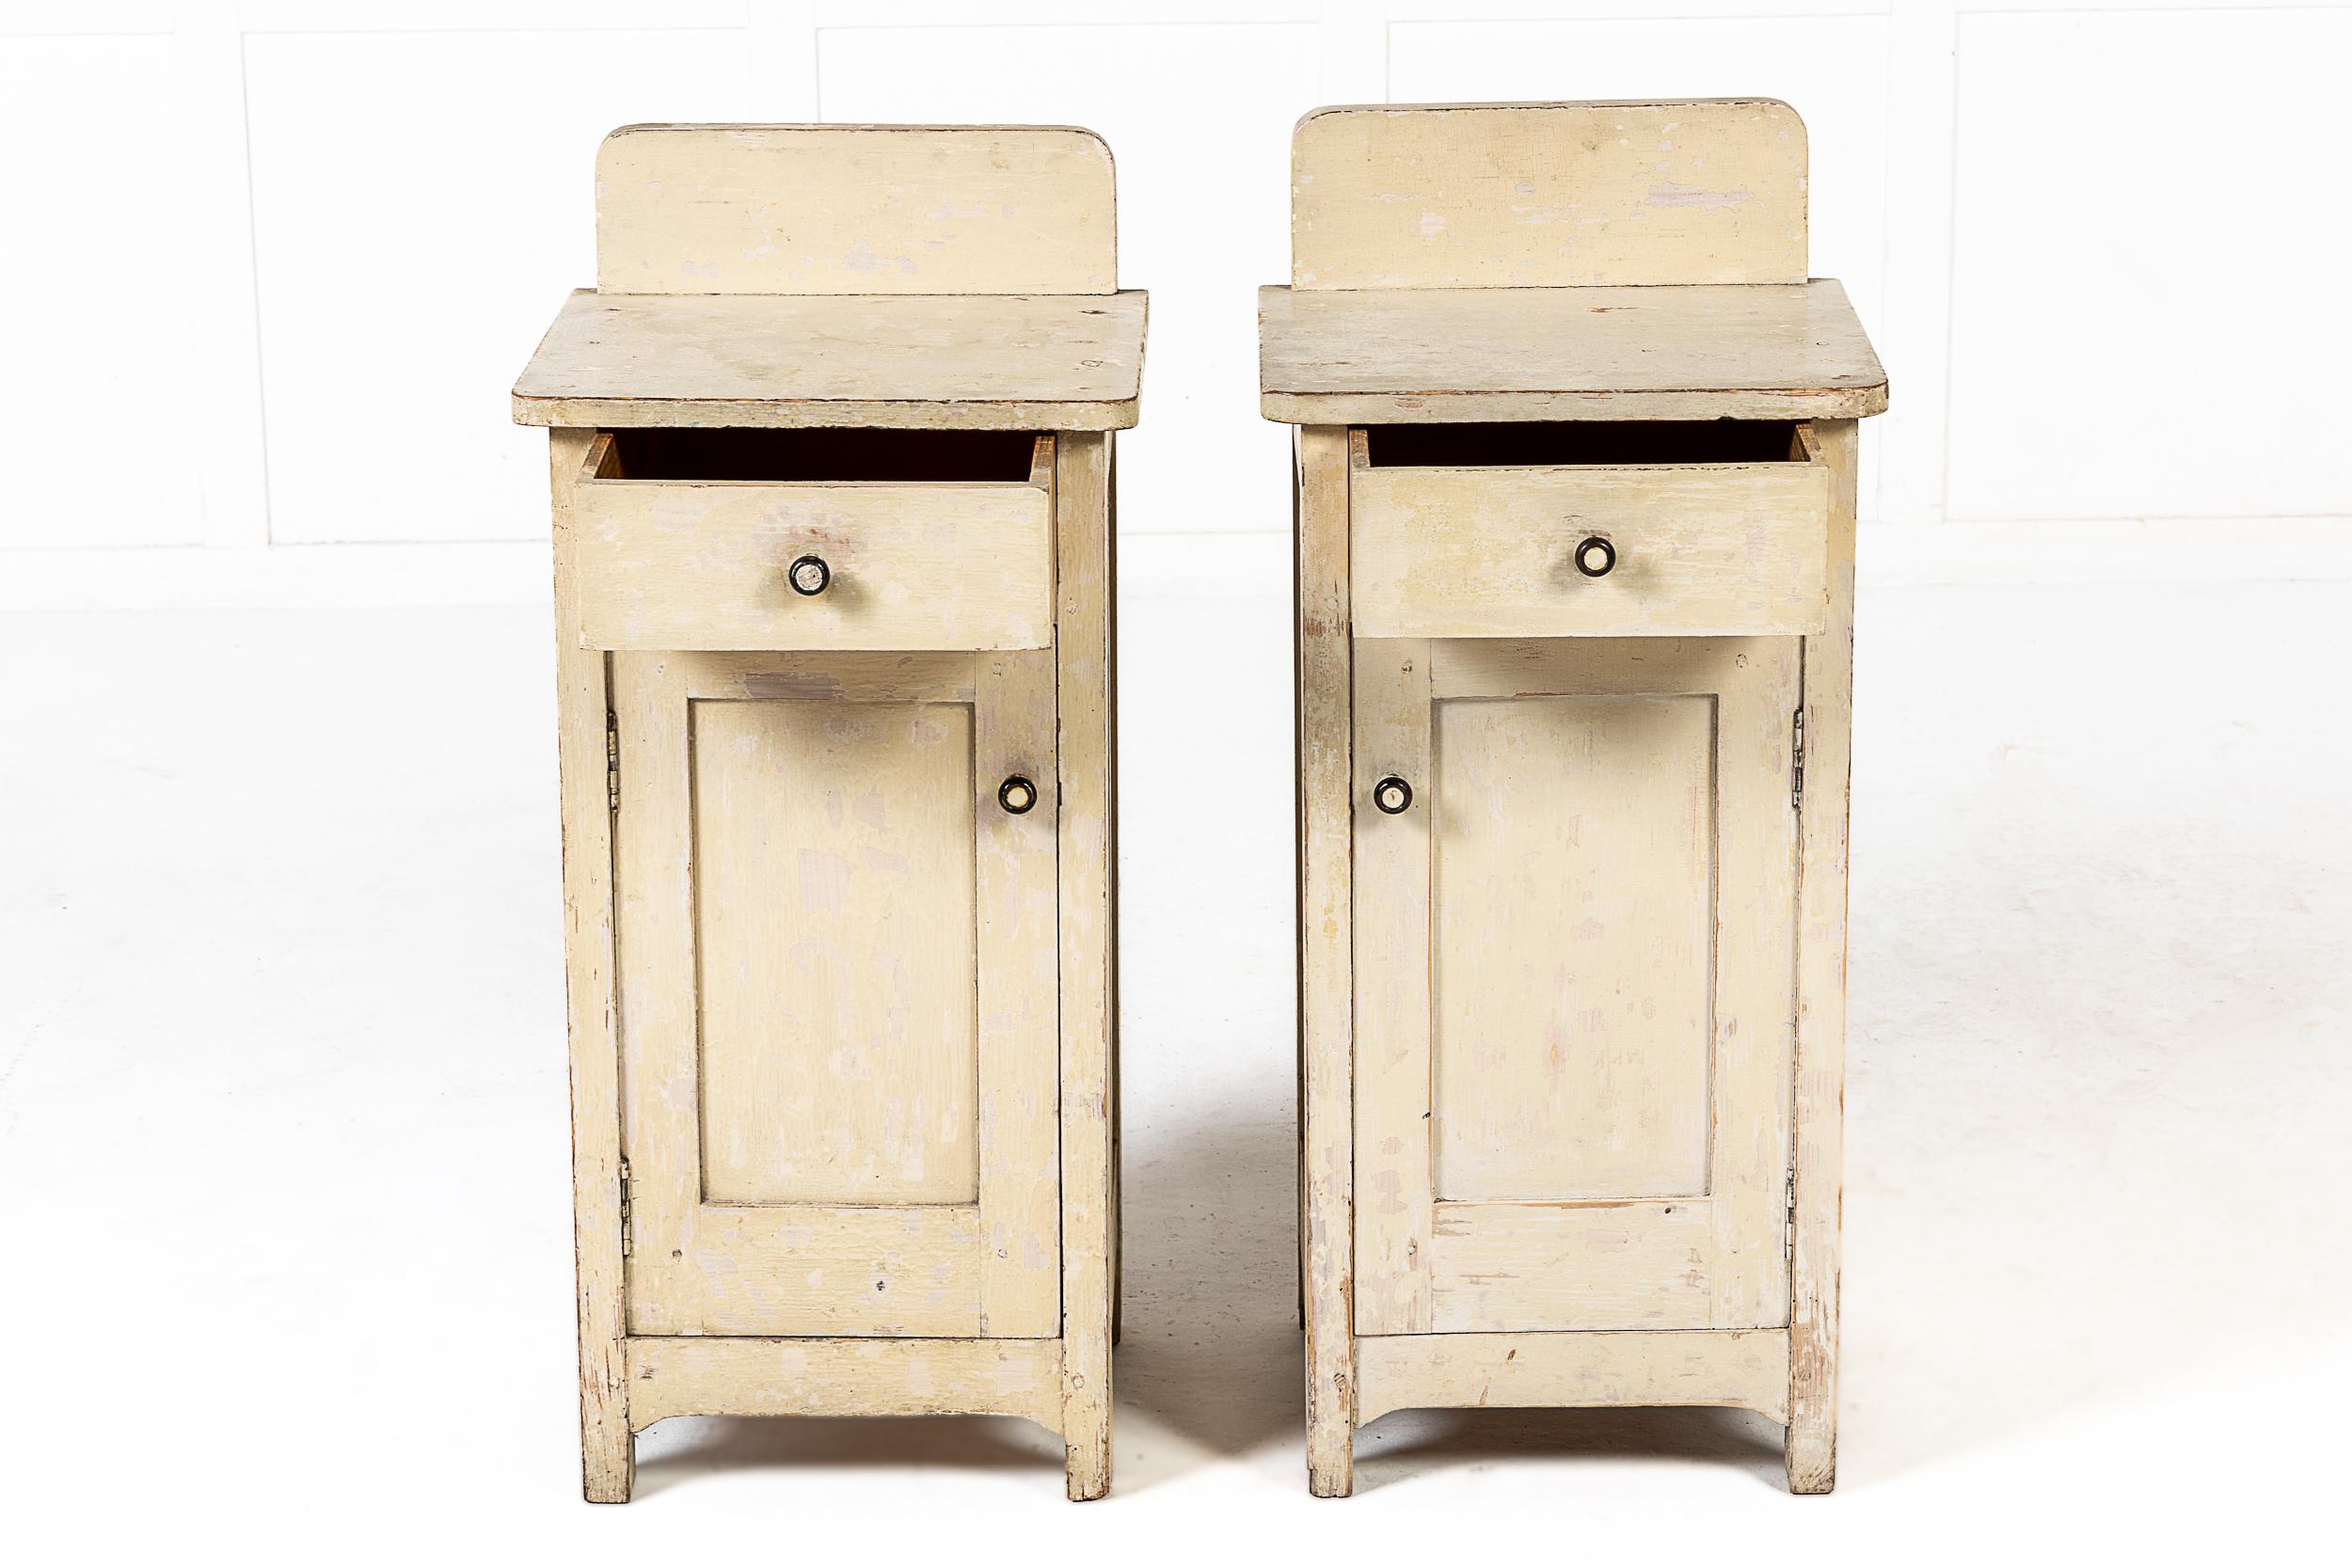 A pair of 19th century painted pot cabinets with single drawer, and panelled doors open to reveal shelves within. The tops have a back panel.
